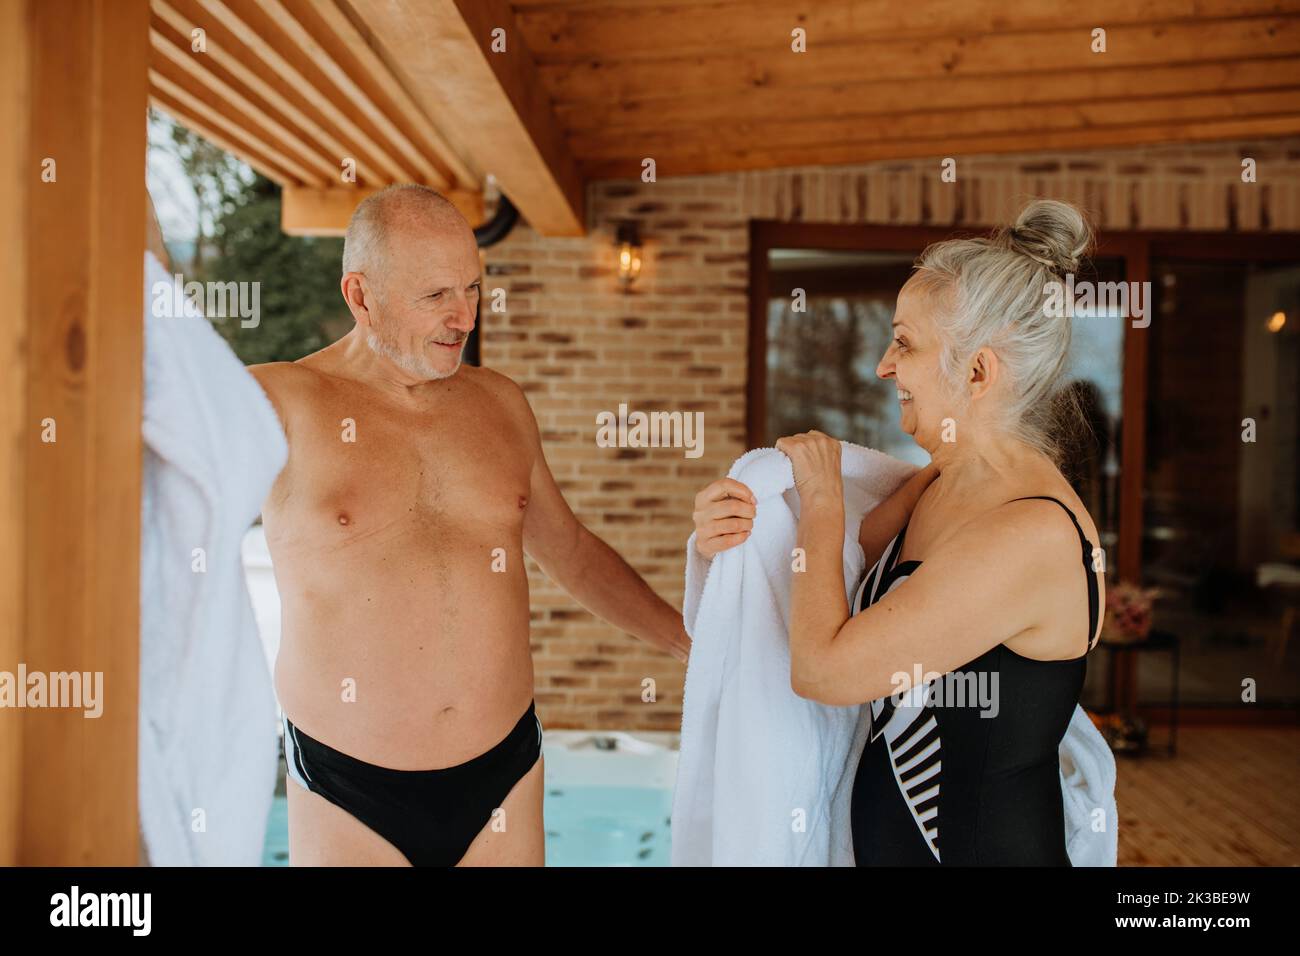 Senior couple standing in terrace and preparing for outdoor bathing, putting off bathrobes, during cold winter day. Stock Photo